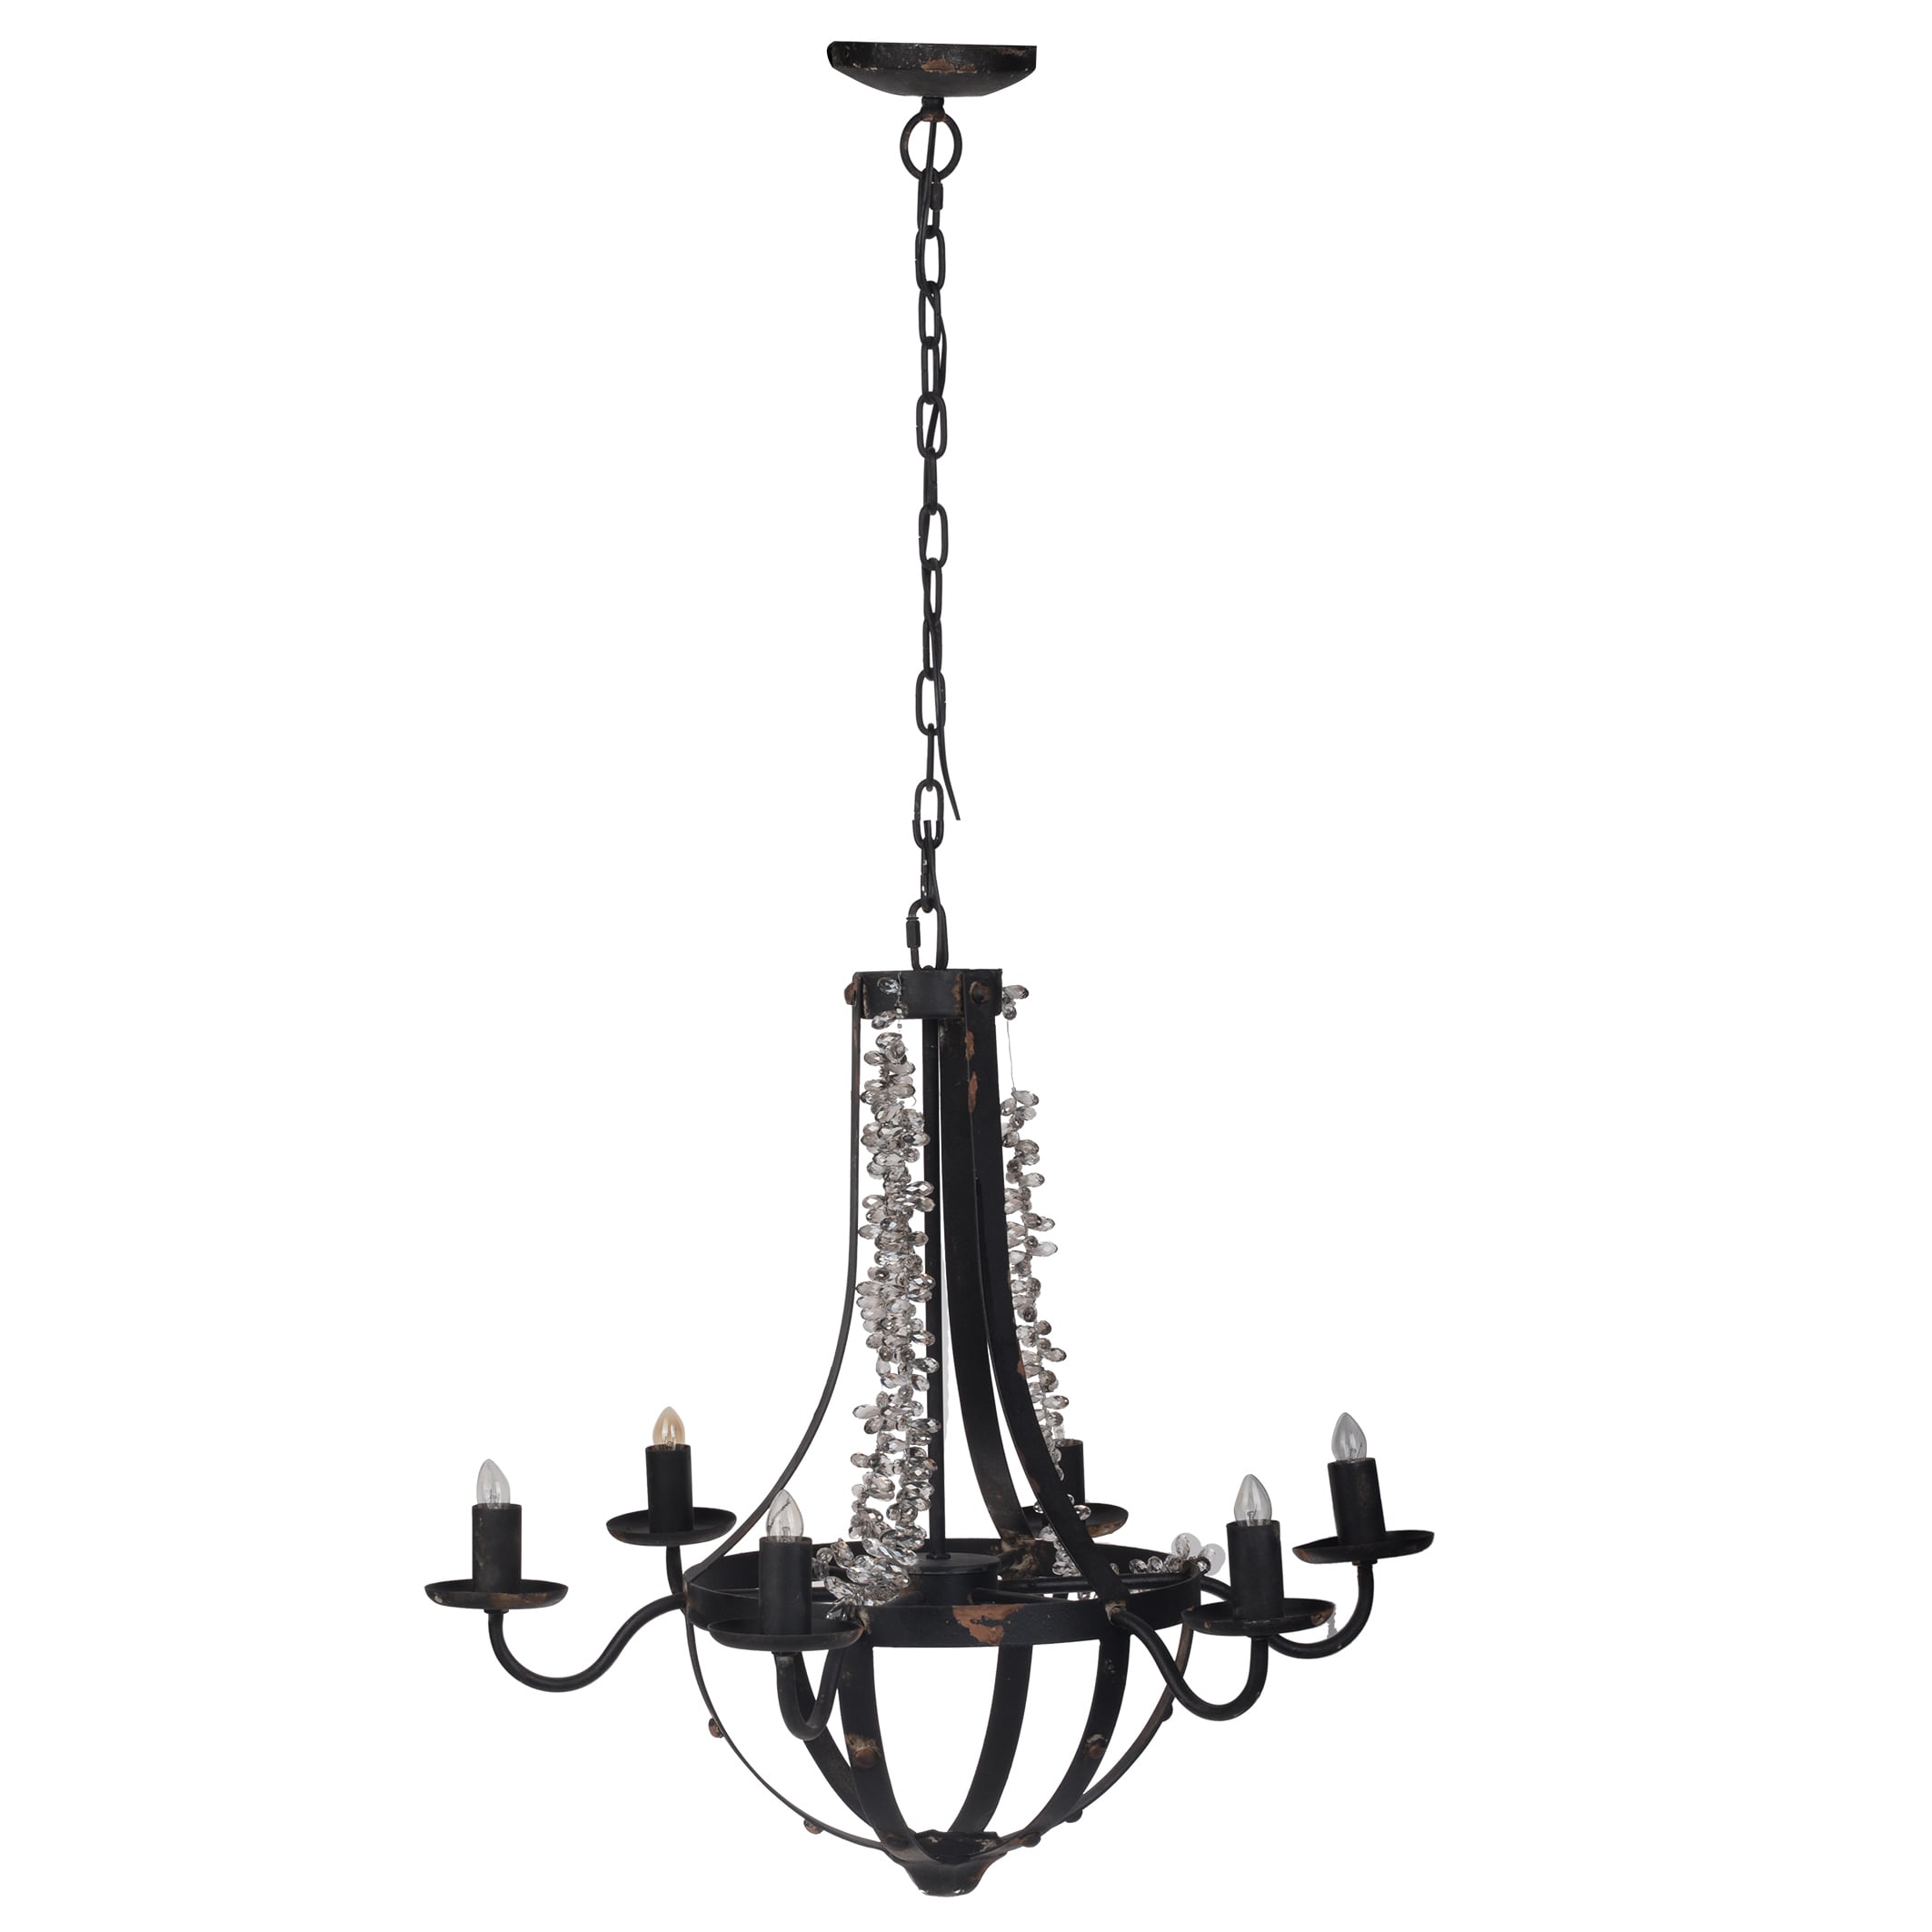 Black Iron 6 Light Chandelier 25 Inches Wide x 22 Inches High With Faceted Jeweled Accents - image 2 of 2